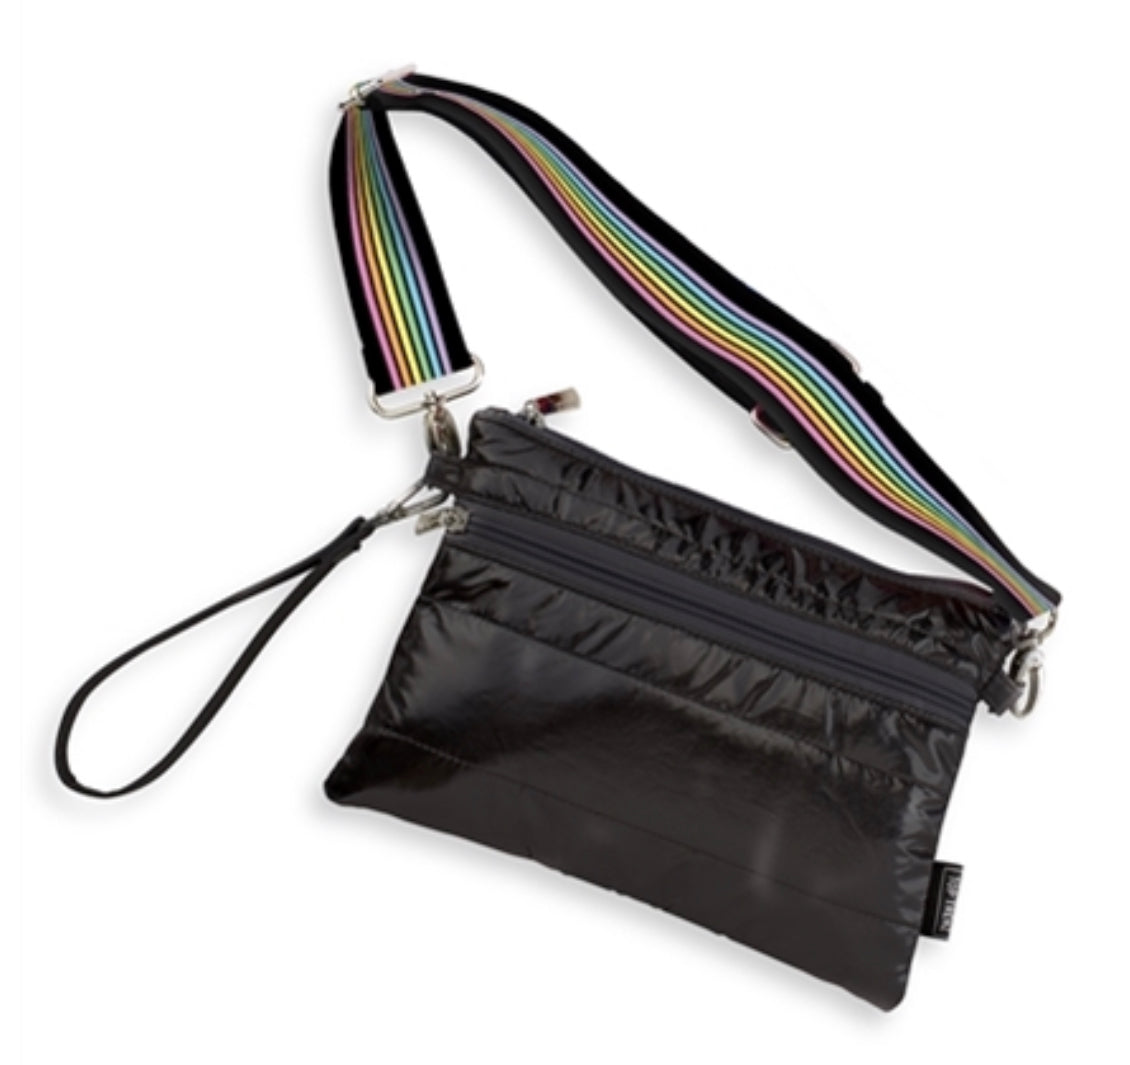 HOT ITEM! Top Trenz puffer crossbody bag, can also be worn as a belt bag or wristlet! (also available on our website in a cell phone bag style)